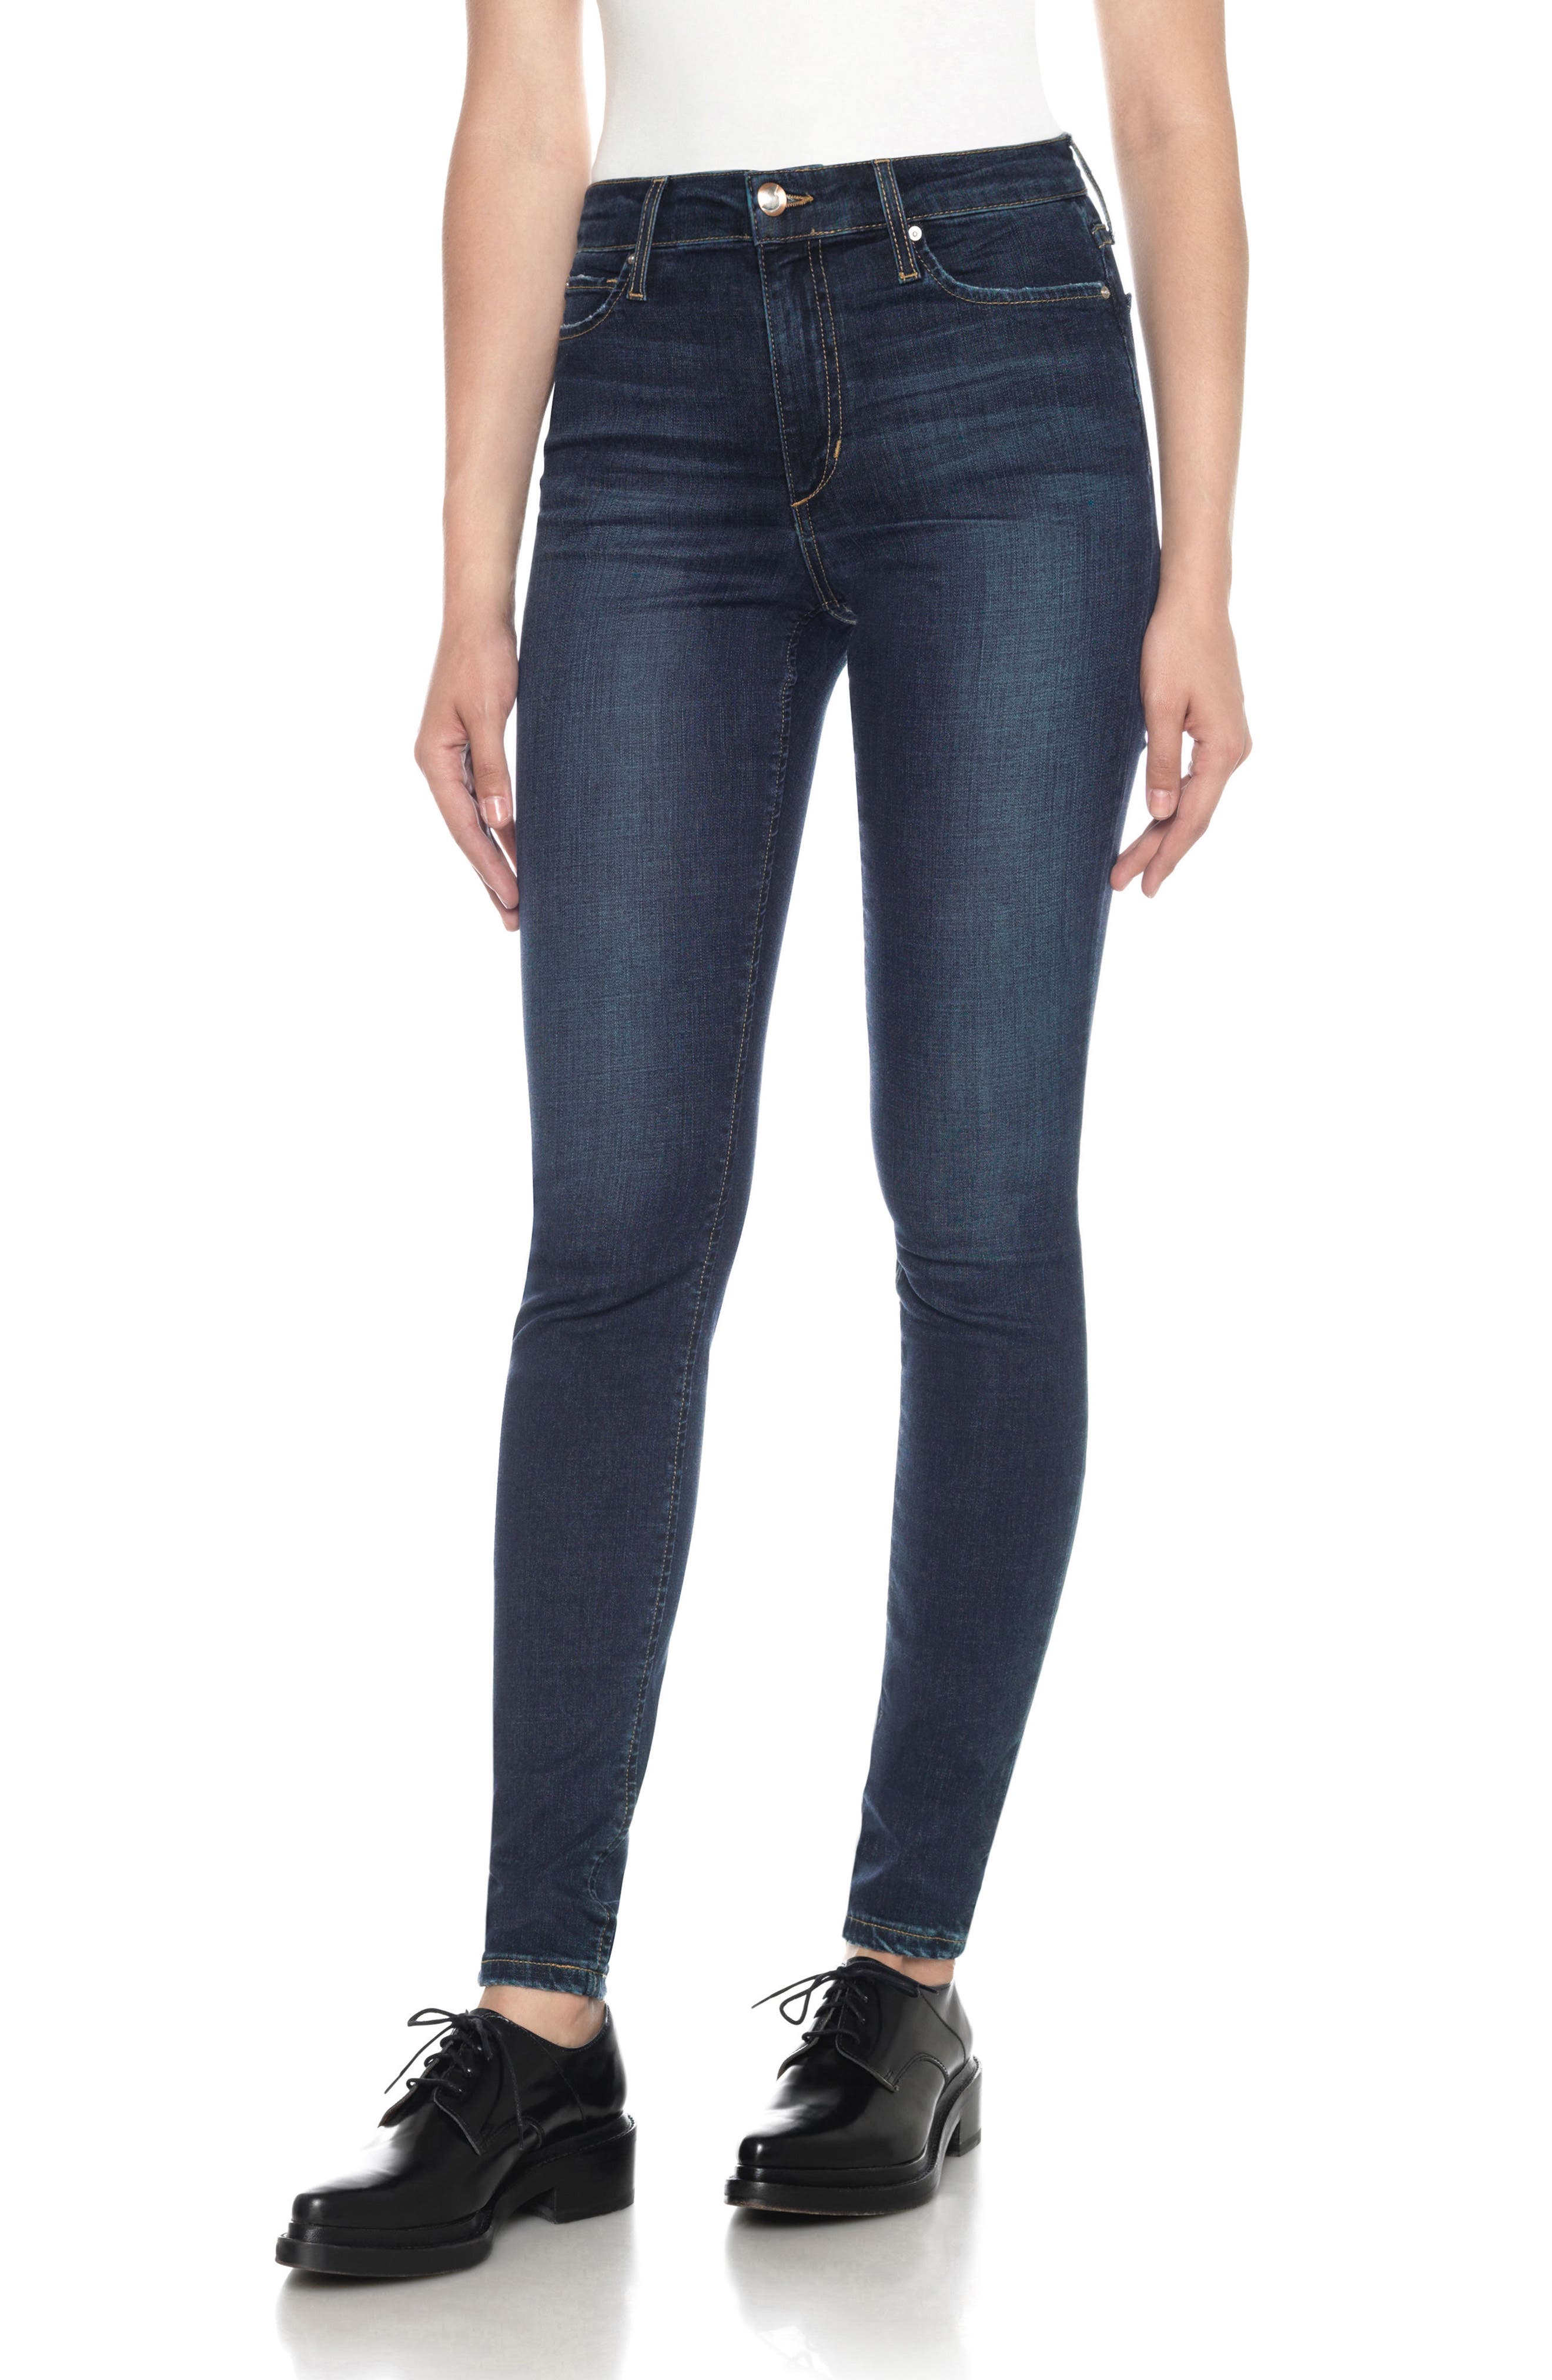 Joes Jeans Womens Charlie High Rise Skinny Jeans